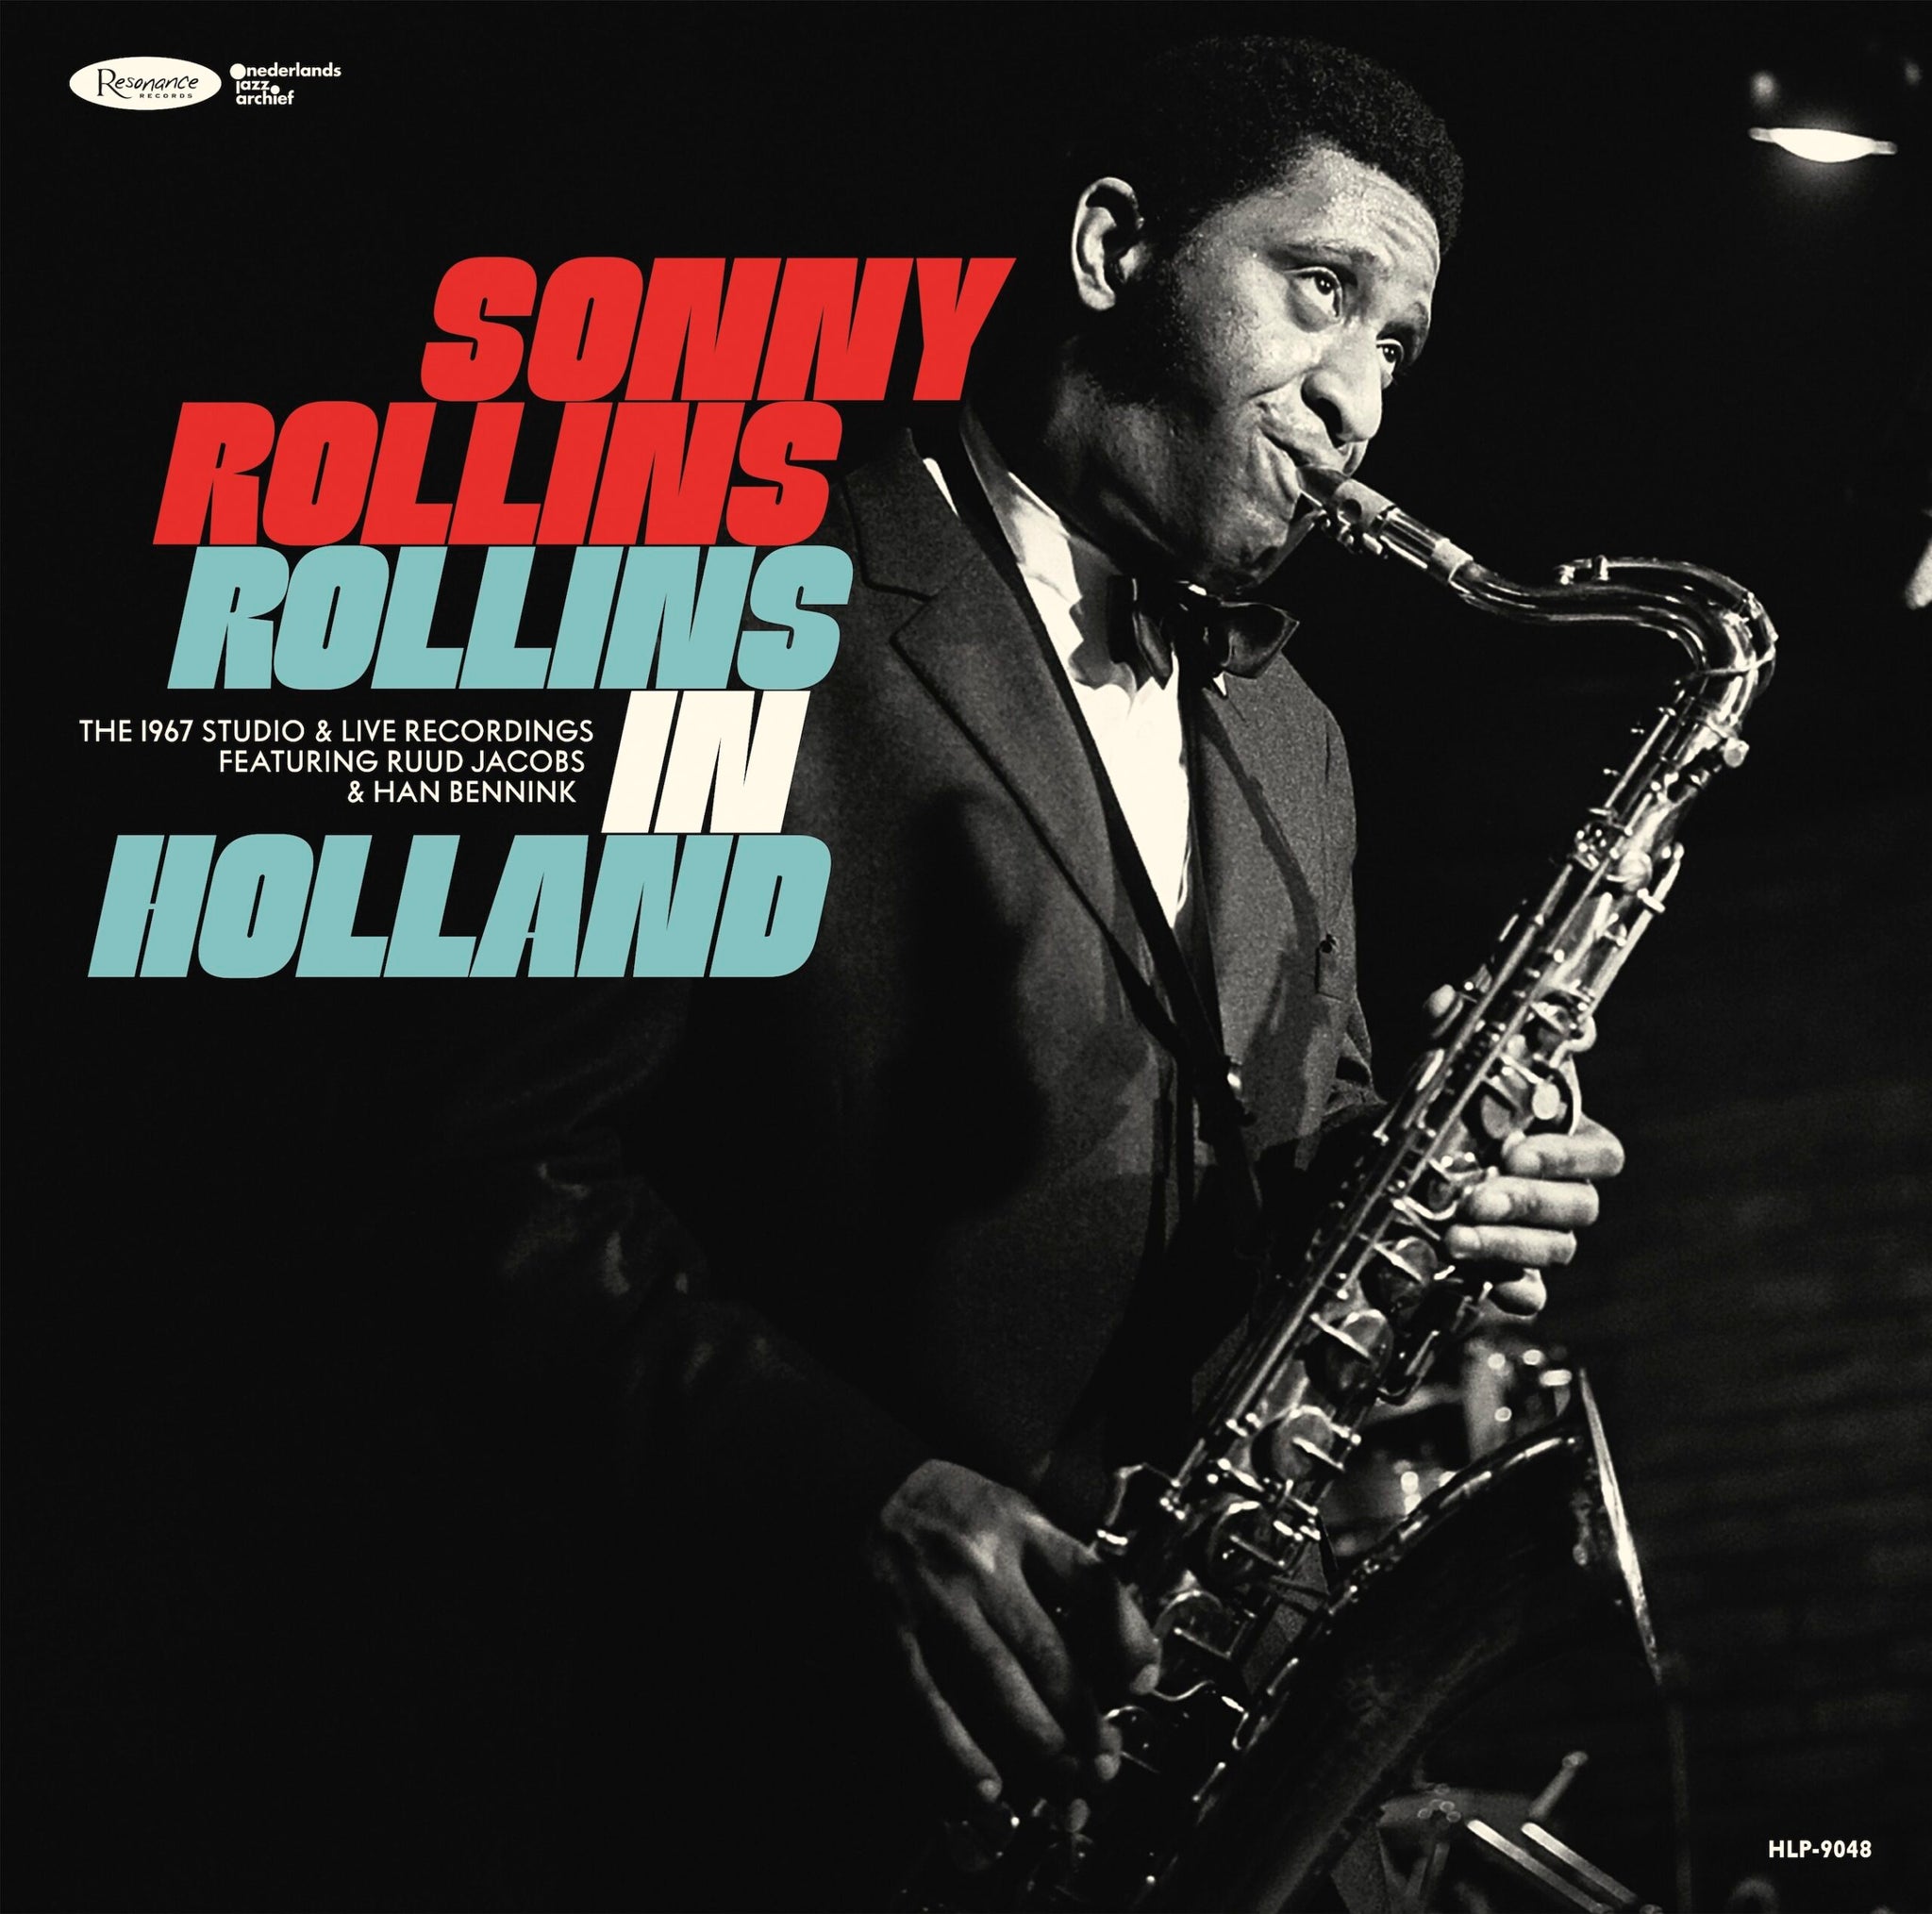 SONNY ROLLINS - Rollins In Holland: The 1967 Studio and Live Recordings - 3LP - Limited Vinyl [BF2020-NOV27]